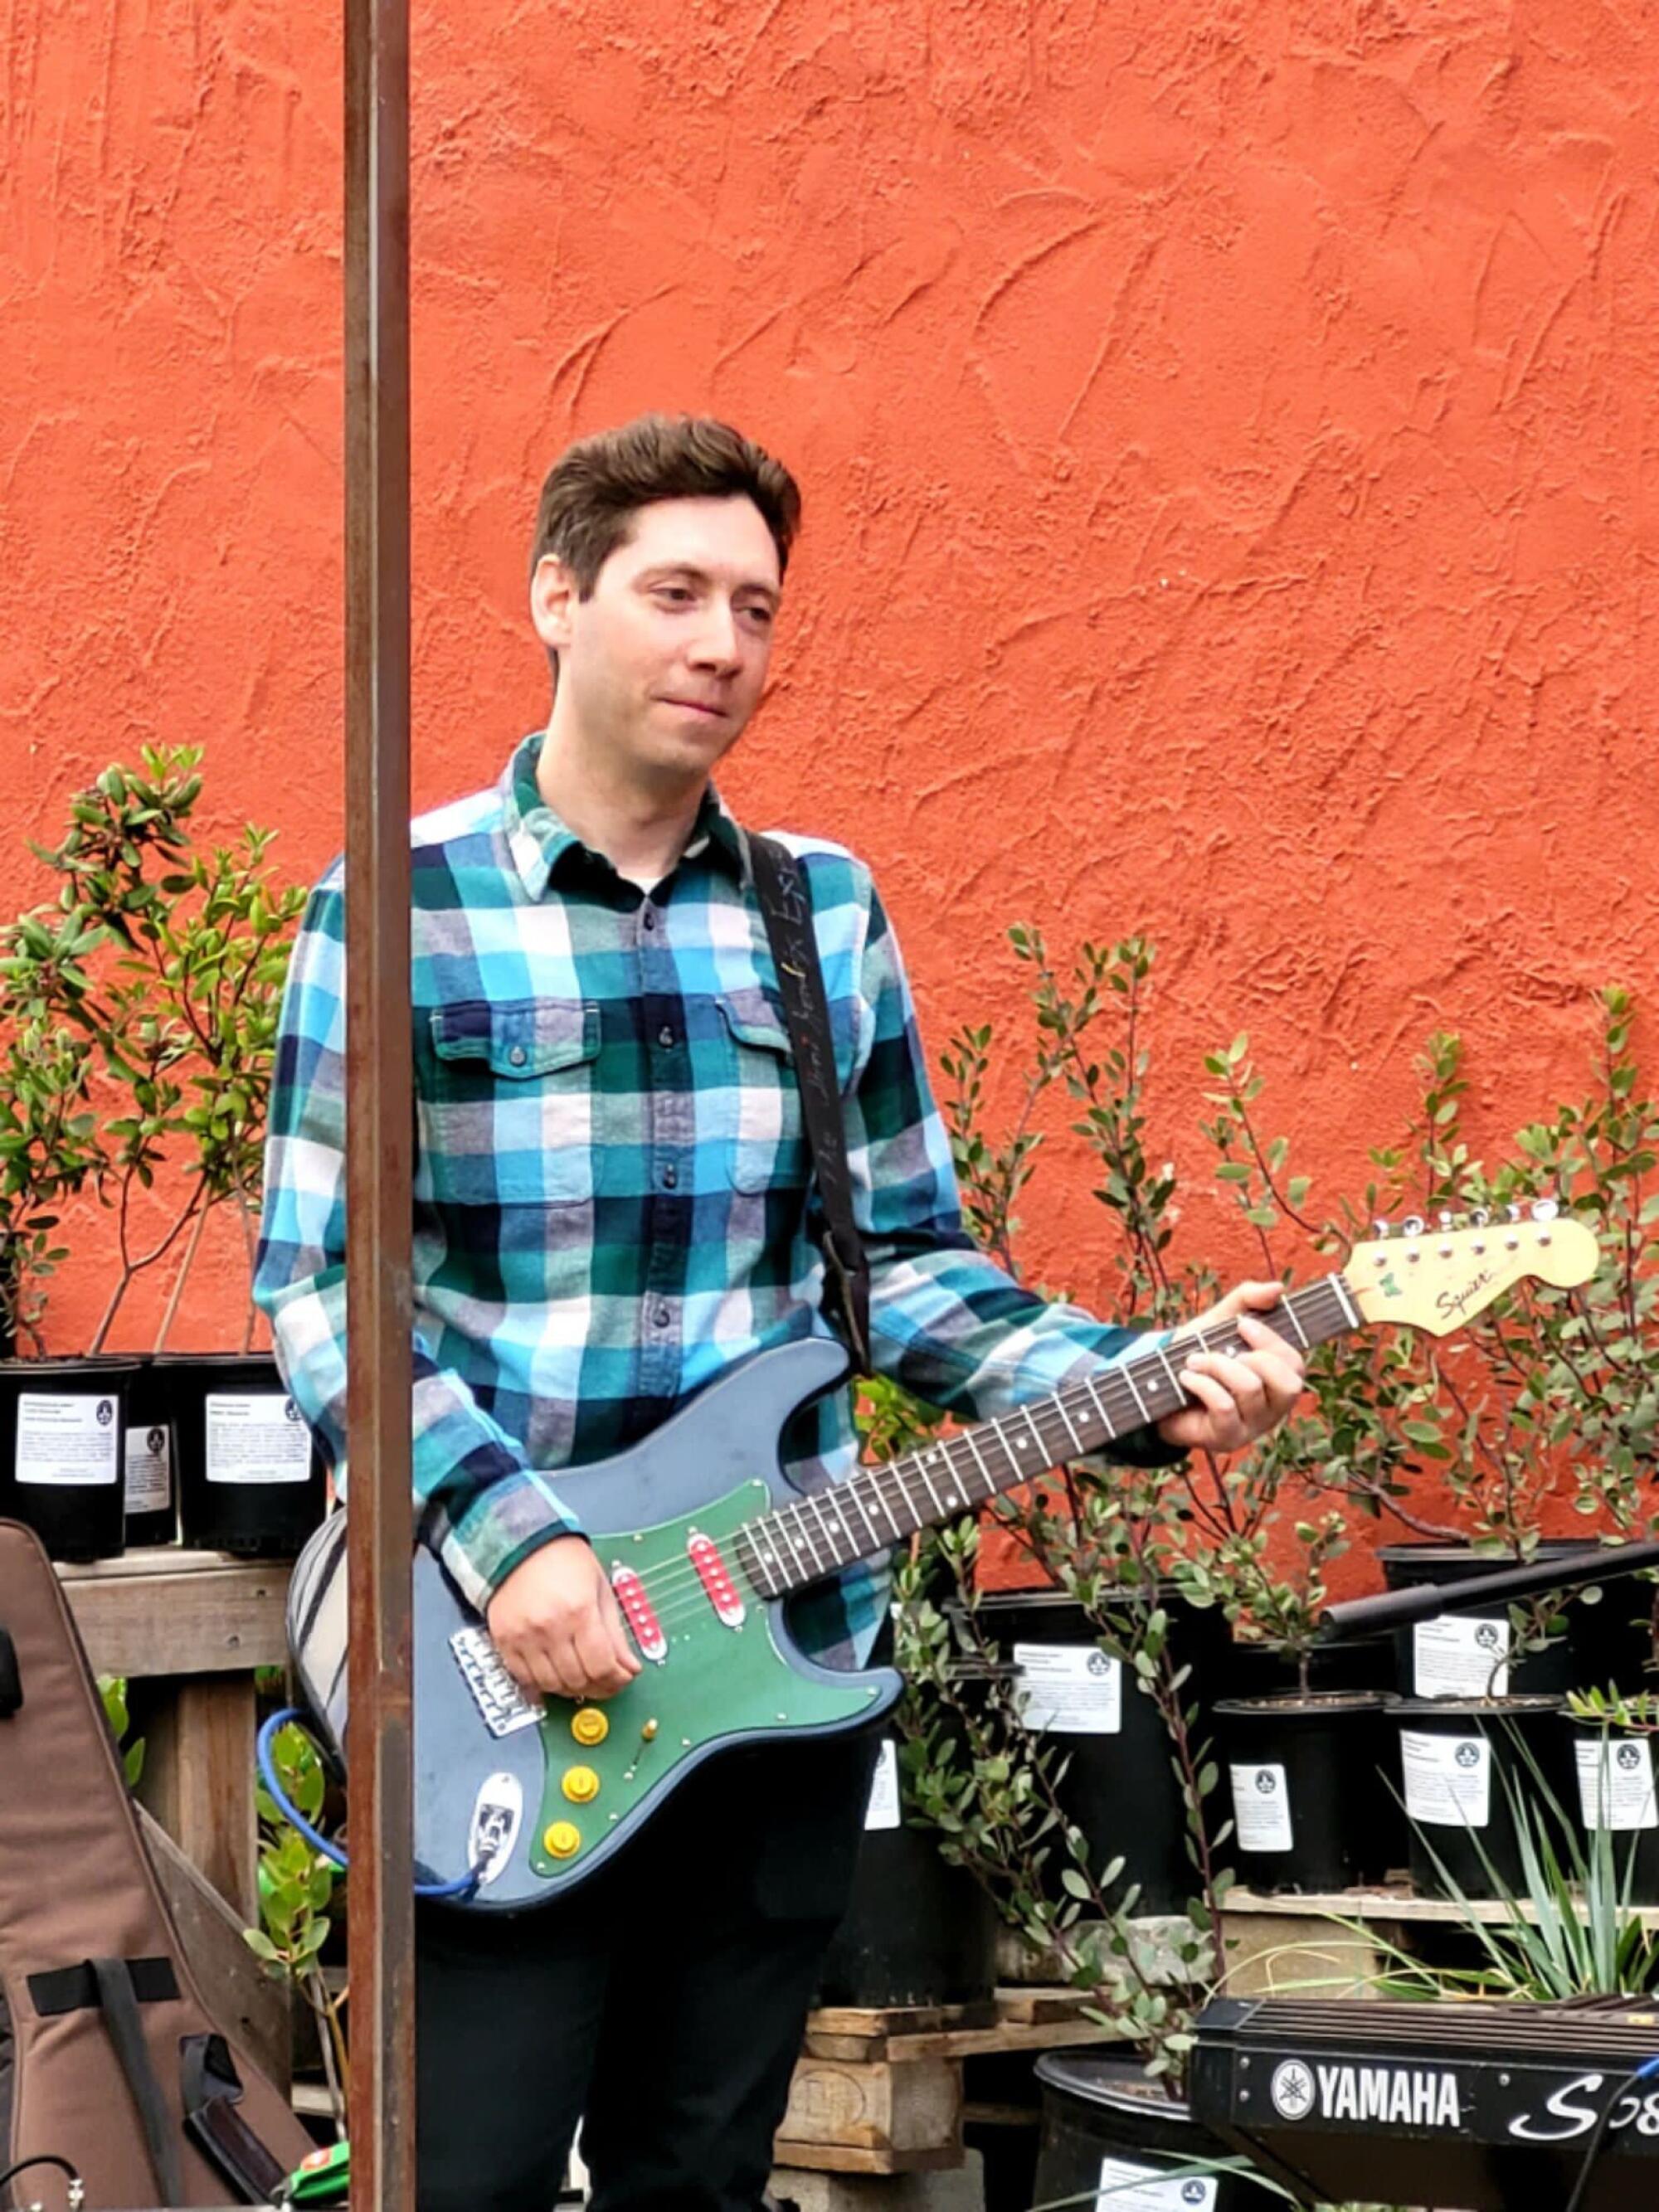 A man in a plaid shirt holding a guitar stands in front of an orange wall and potted plants